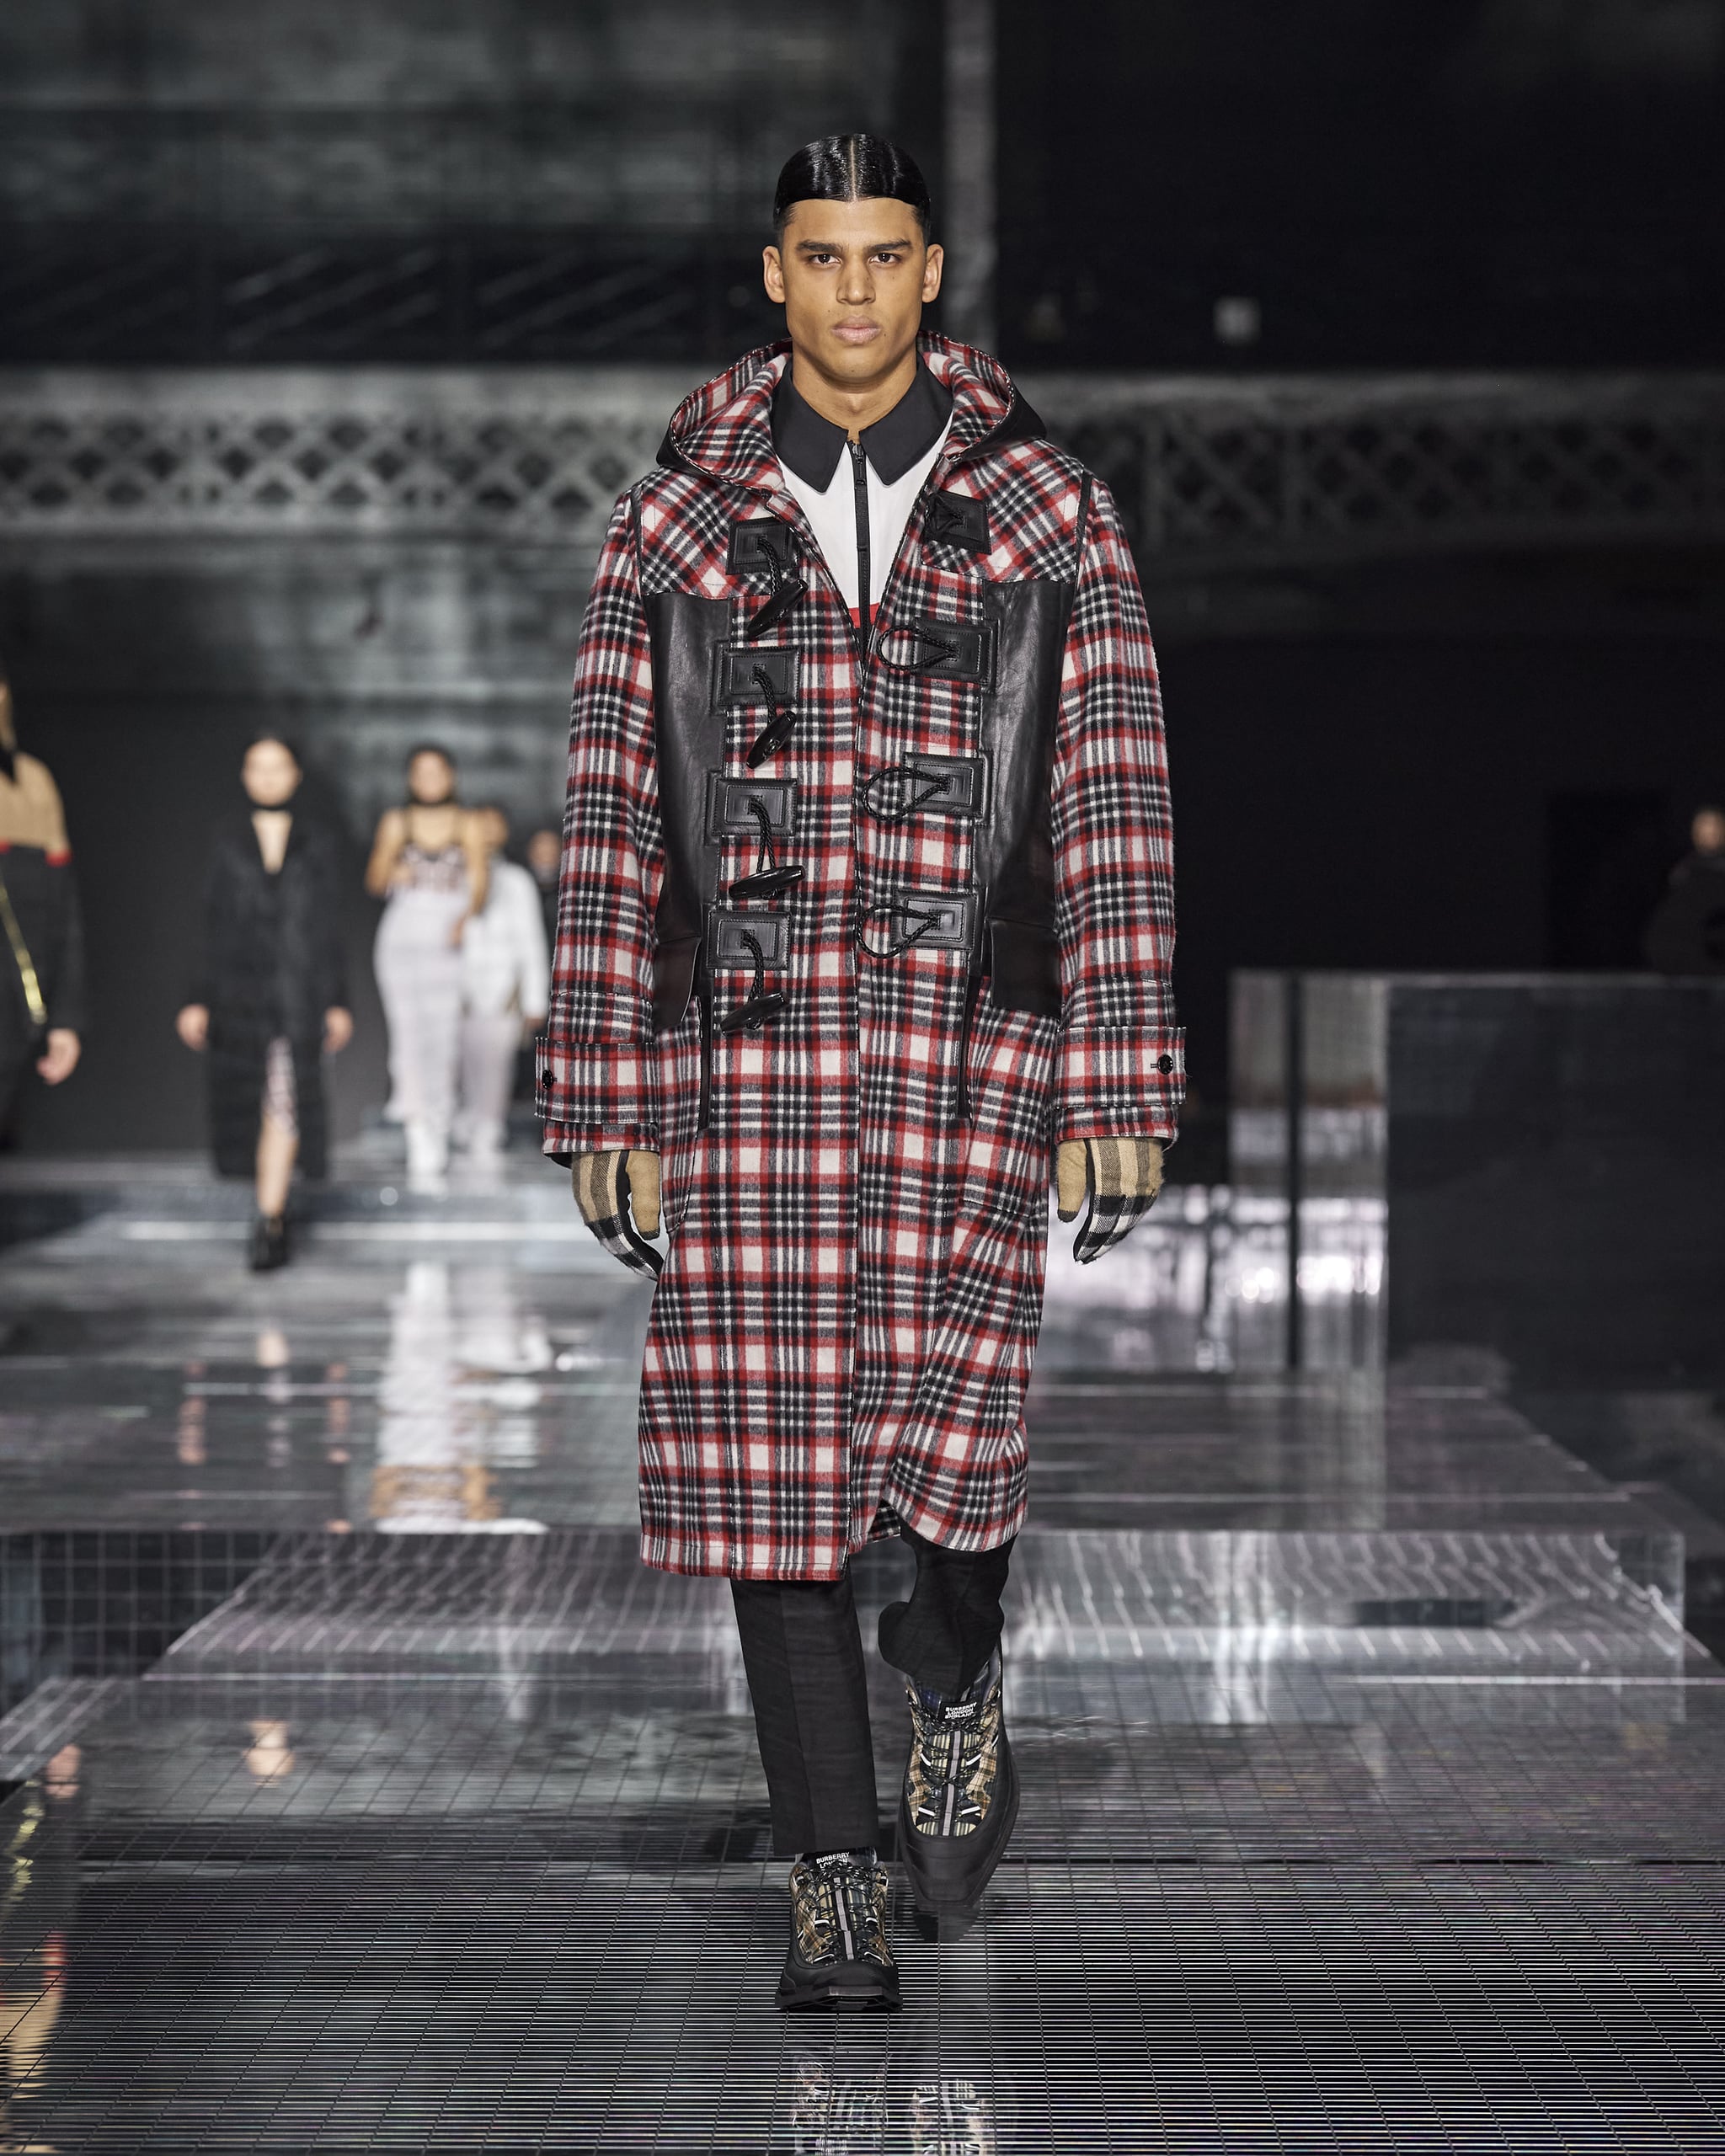 Burberry 2020 | Burberry's Fall 2020 Gives a Sexy New on the Heritage Checks | POPSUGAR Fashion Photo 68